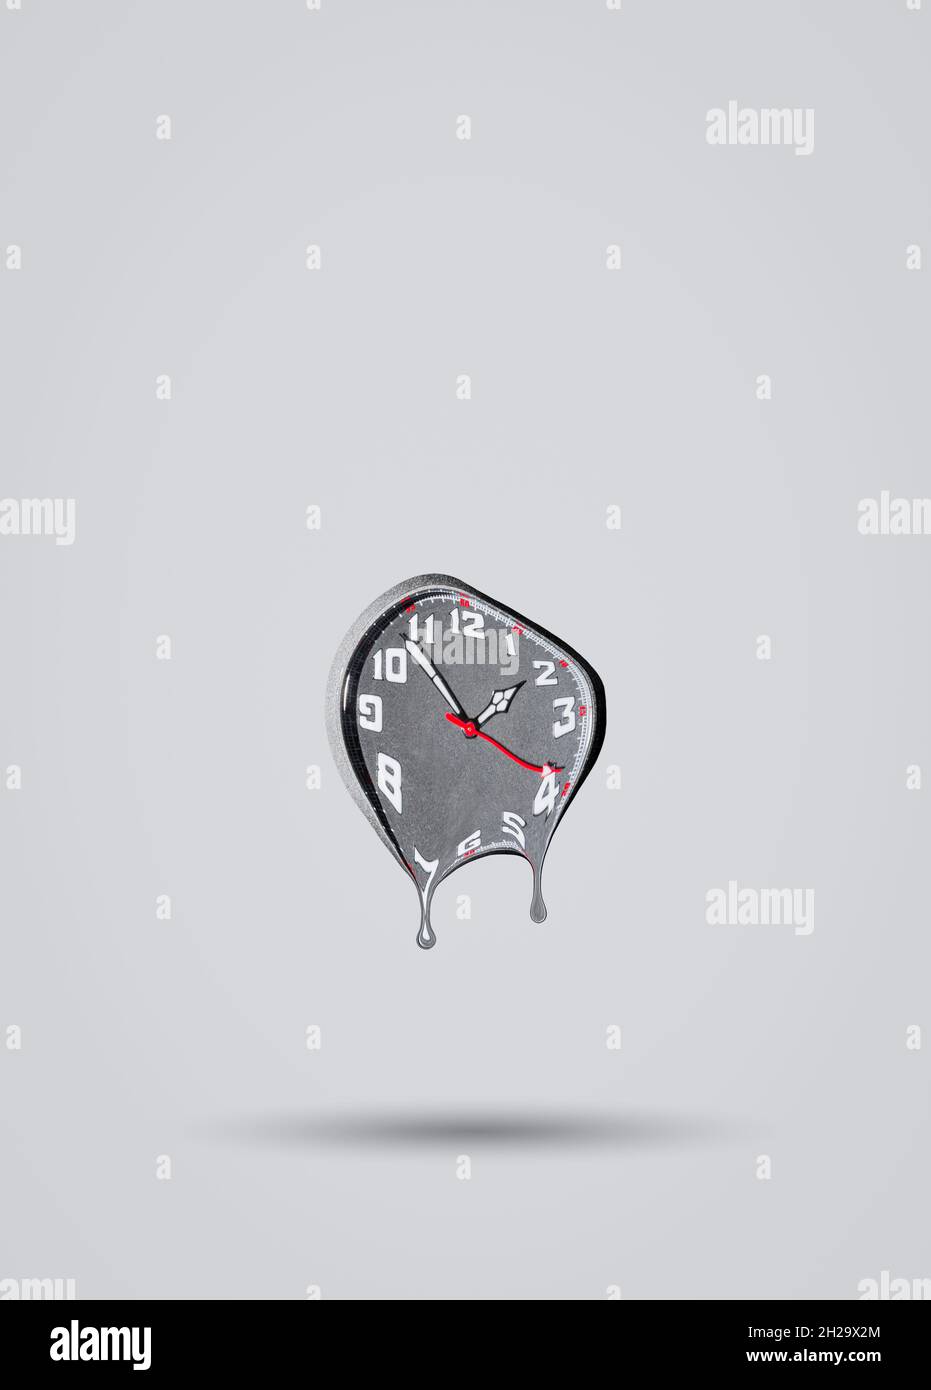 Melting clock on grey background. Time passing by idea. Minimal abstract life or business concept. With copy space. Stock Photo